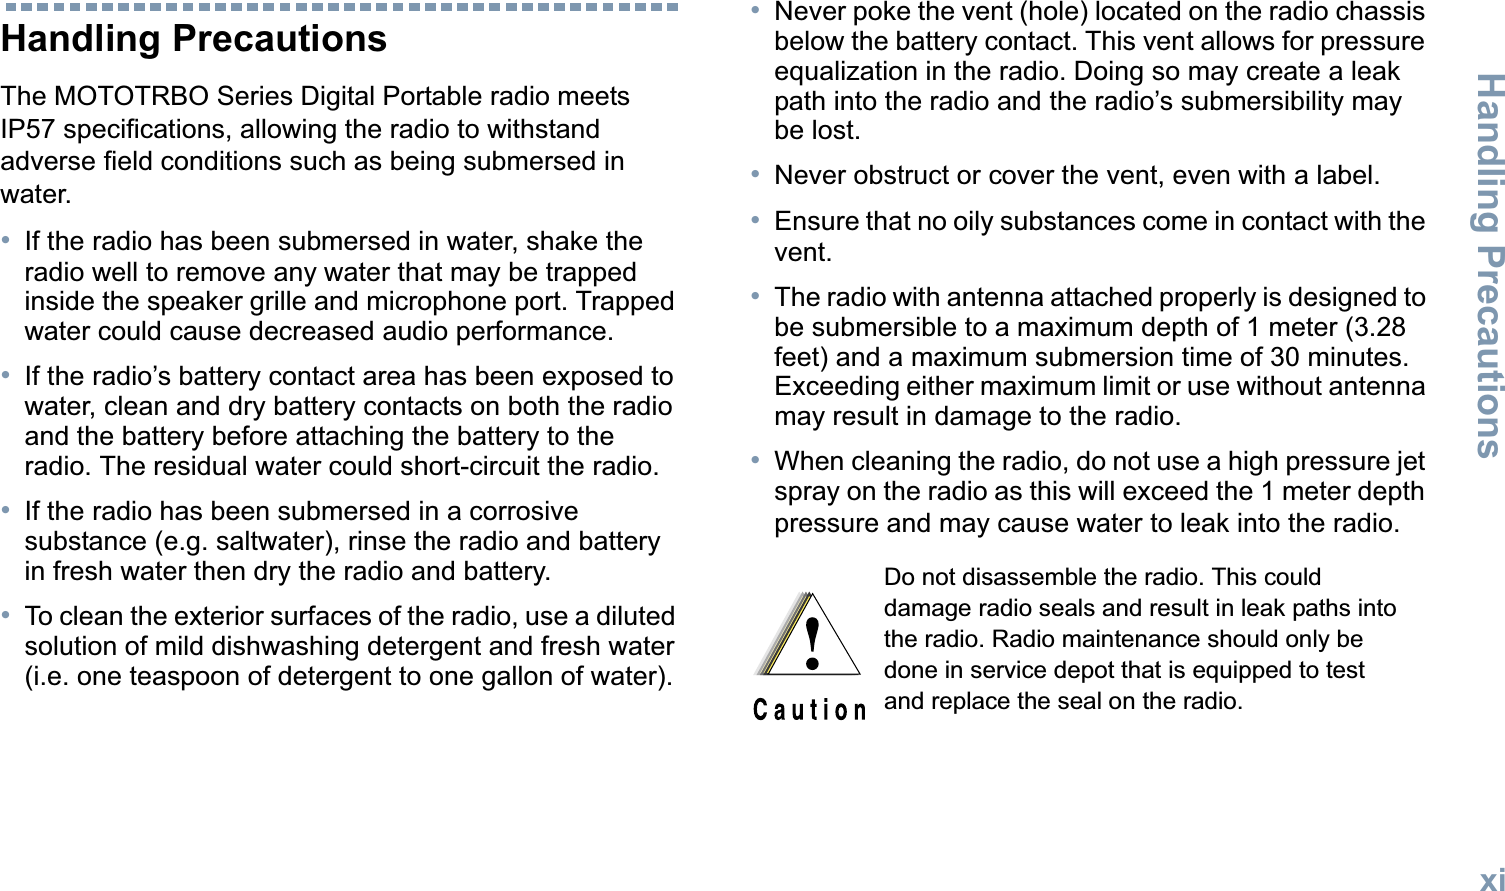 Handling PrecautionsEnglishxiHandling PrecautionsThe MOTOTRBO Series Digital Portable radio meets IP57 specifications, allowing the radio to withstand adverse field conditions such as being submersed in water.•If the radio has been submersed in water, shake the radio well to remove any water that may be trapped inside the speaker grille and microphone port. Trapped water could cause decreased audio performance.•If the radio’s battery contact area has been exposed to water, clean and dry battery contacts on both the radio and the battery before attaching the battery to the radio. The residual water could short-circuit the radio.•If the radio has been submersed in a corrosive substance (e.g. saltwater), rinse the radio and battery in fresh water then dry the radio and battery.•To clean the exterior surfaces of the radio, use a diluted solution of mild dishwashing detergent and fresh water (i.e. one teaspoon of detergent to one gallon of water).•Never poke the vent (hole) located on the radio chassis below the battery contact. This vent allows for pressure equalization in the radio. Doing so may create a leak path into the radio and the radio’s submersibility may be lost.•Never obstruct or cover the vent, even with a label. •Ensure that no oily substances come in contact with the vent.•The radio with antenna attached properly is designed to be submersible to a maximum depth of 1 meter (3.28 feet) and a maximum submersion time of 30 minutes. Exceeding either maximum limit or use without antenna may result in damage to the radio.•When cleaning the radio, do not use a high pressure jet spray on the radio as this will exceed the 1 meter depth pressure and may cause water to leak into the radio. Do not disassemble the radio. This could damage radio seals and result in leak paths into the radio. Radio maintenance should only be done in service depot that is equipped to test and replace the seal on the radio.